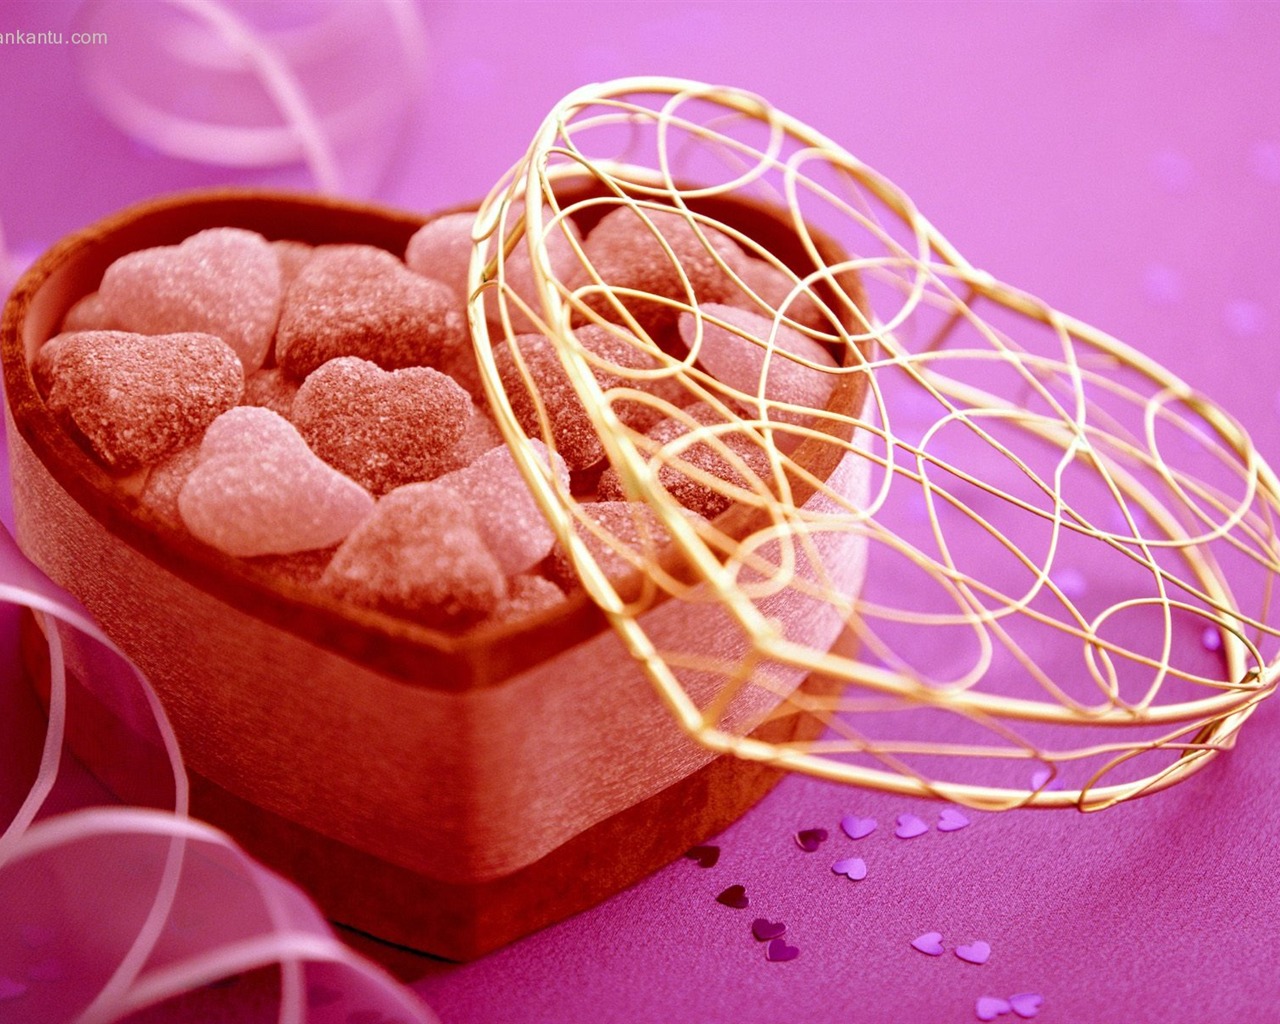 The indelible Valentine's Day Chocolate #1 - 1280x1024